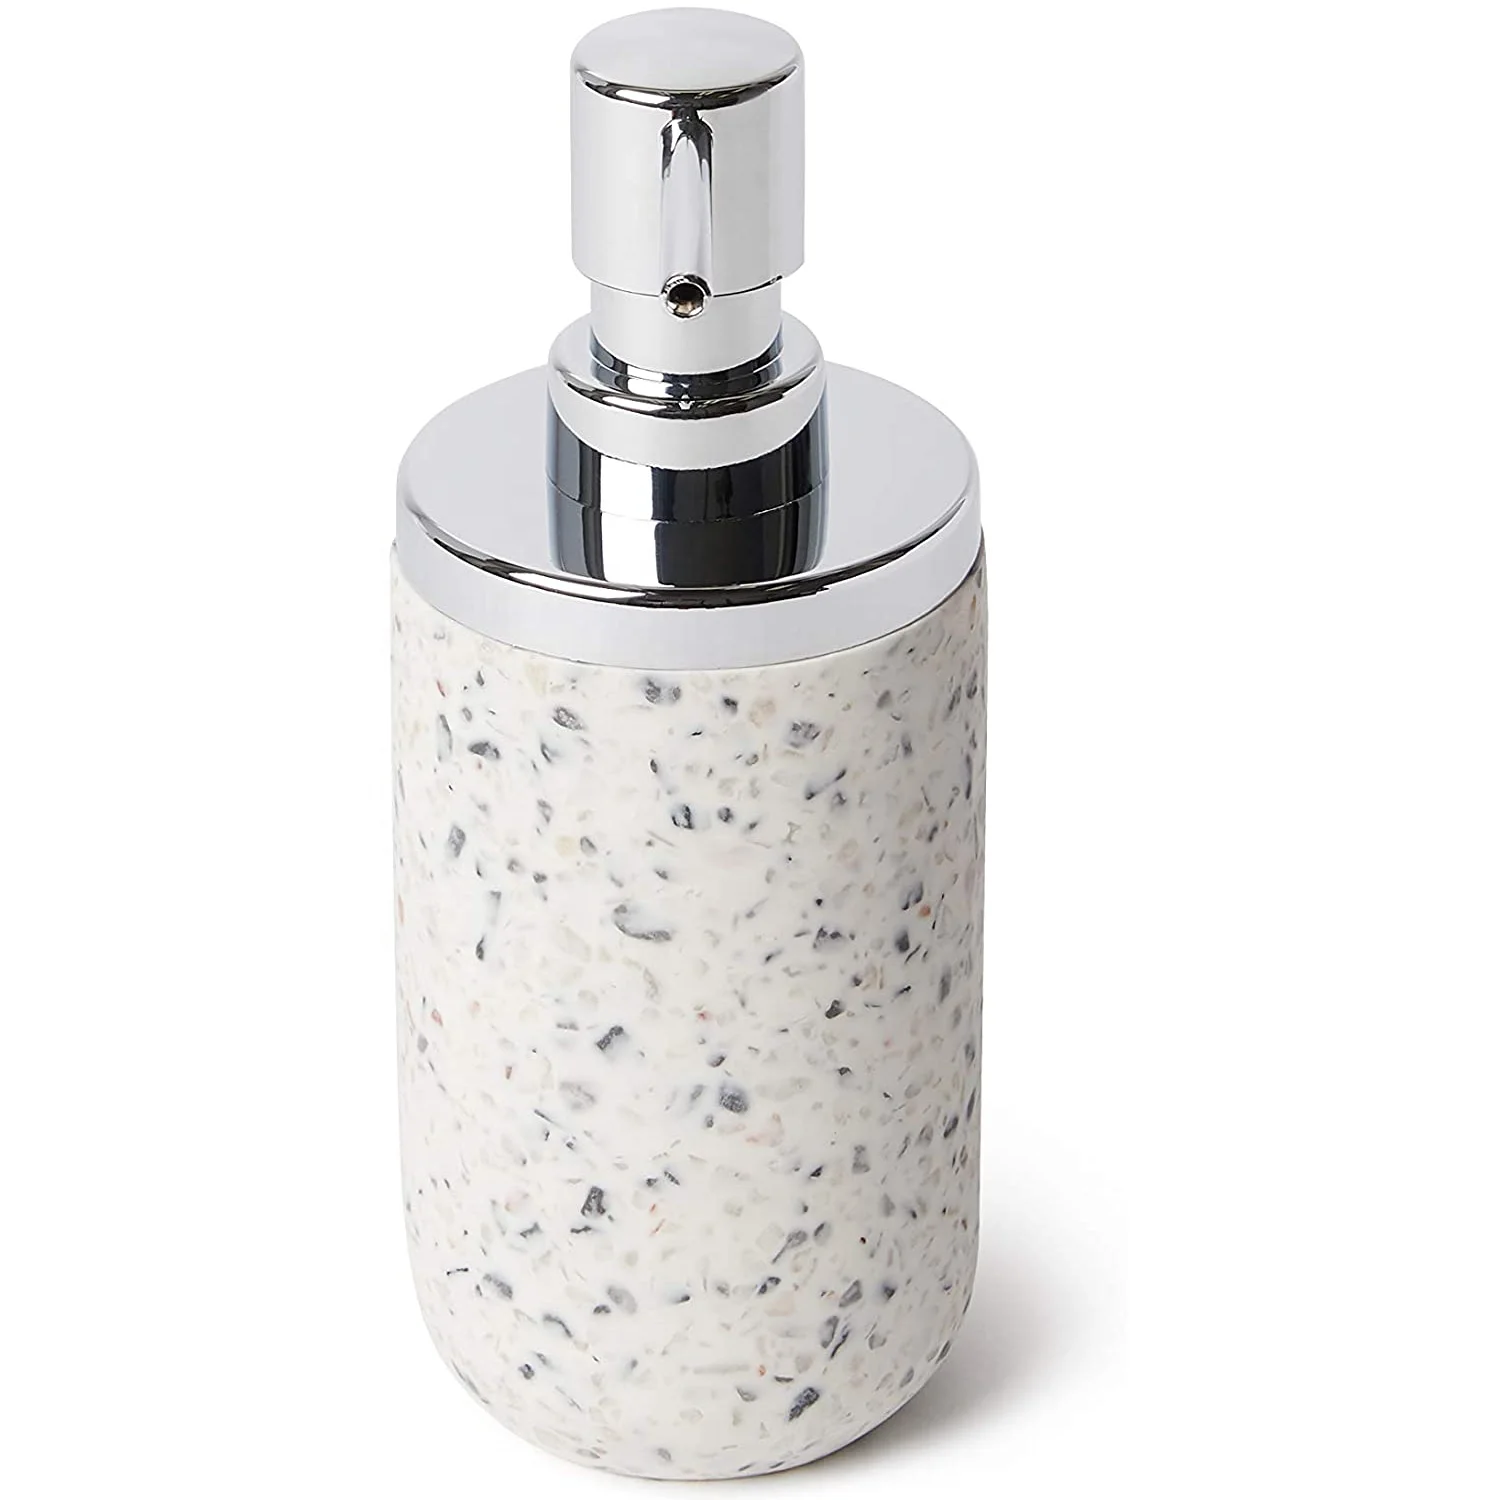 3 pieces Terrazzo White Sand Mixed Resin Bathroom Accessories Sets For Gift